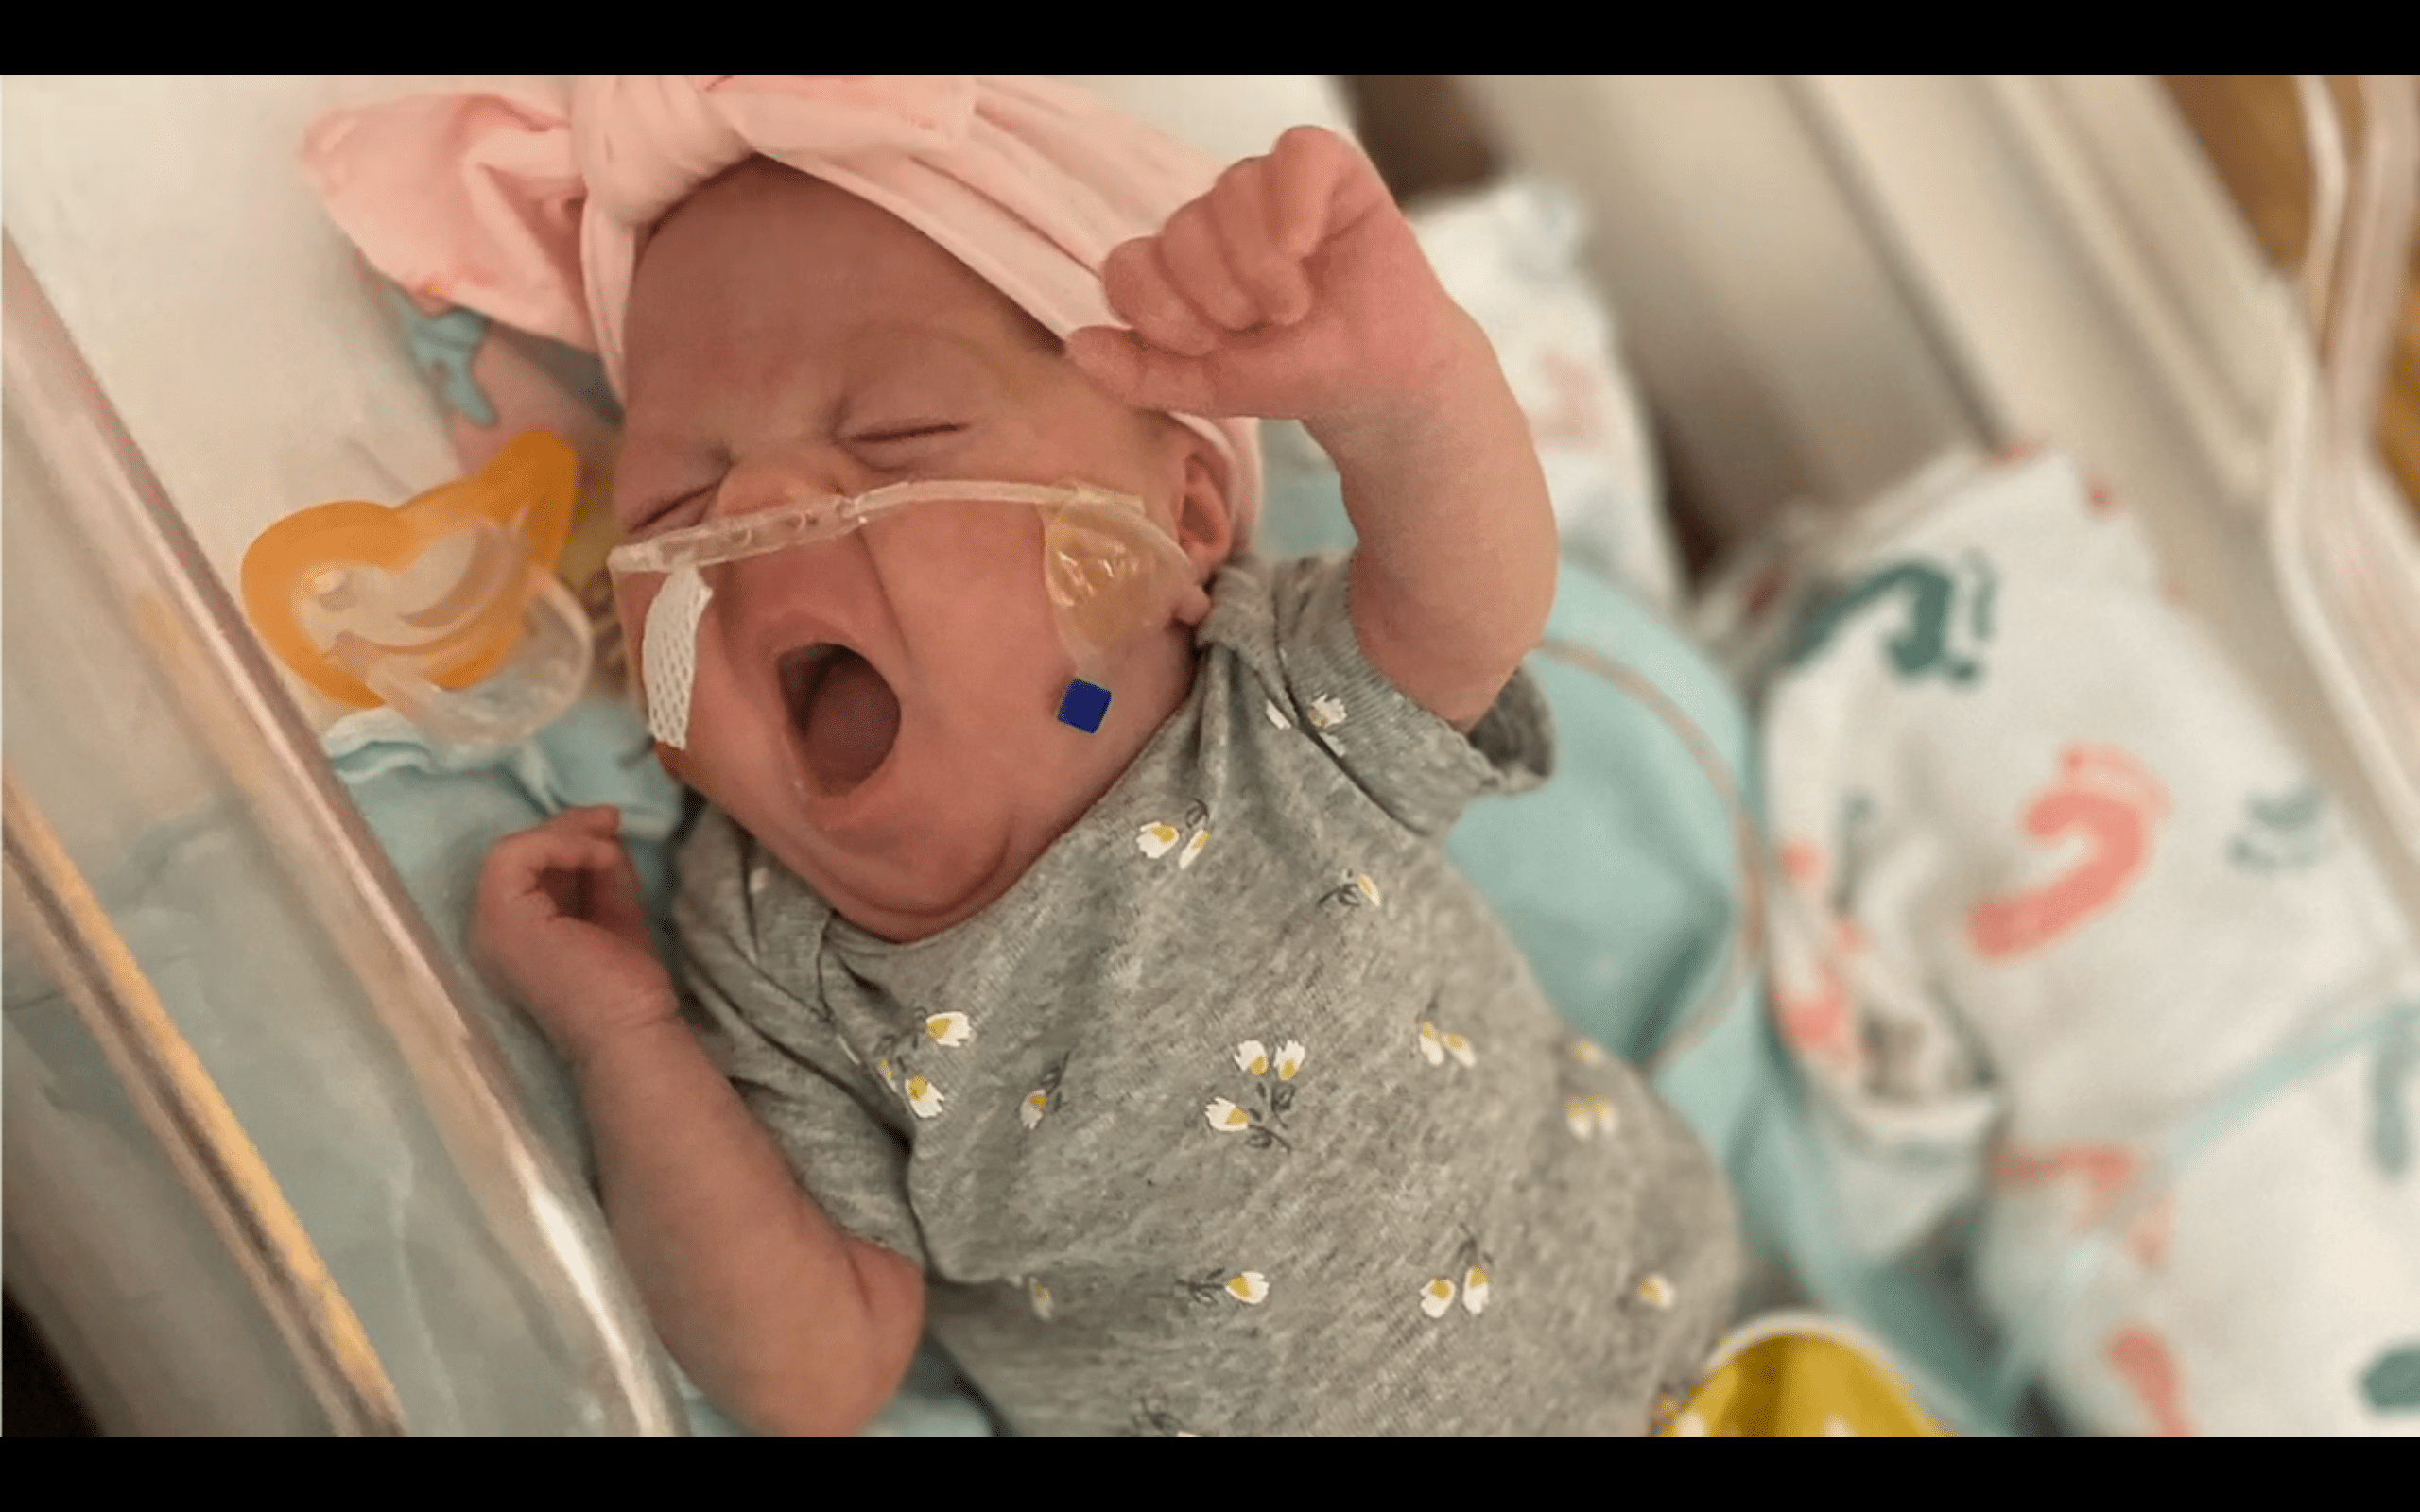 Prematue baby who survived being born at 22 weeks. | Photo: YouTube/Rizzbag